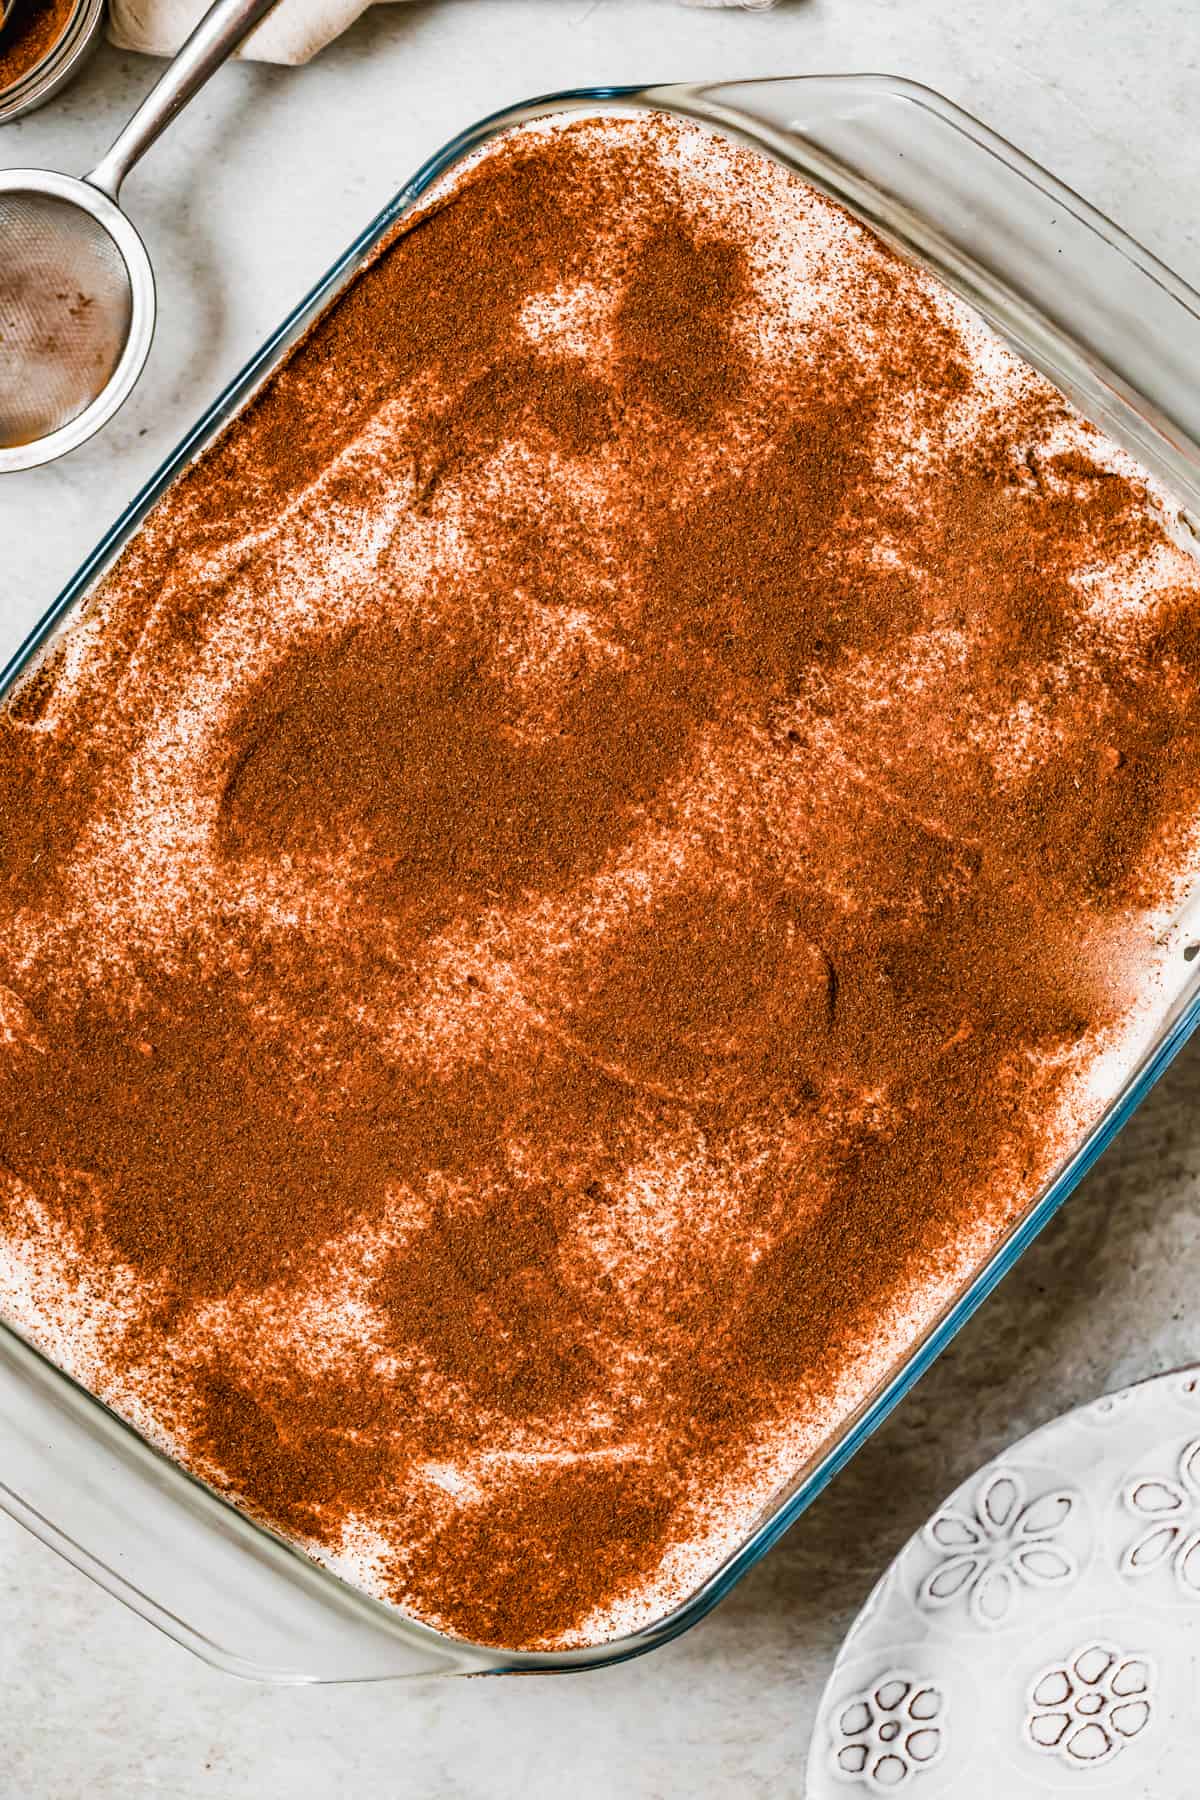 Cinnamon topped tres leches cake in a baking pan.